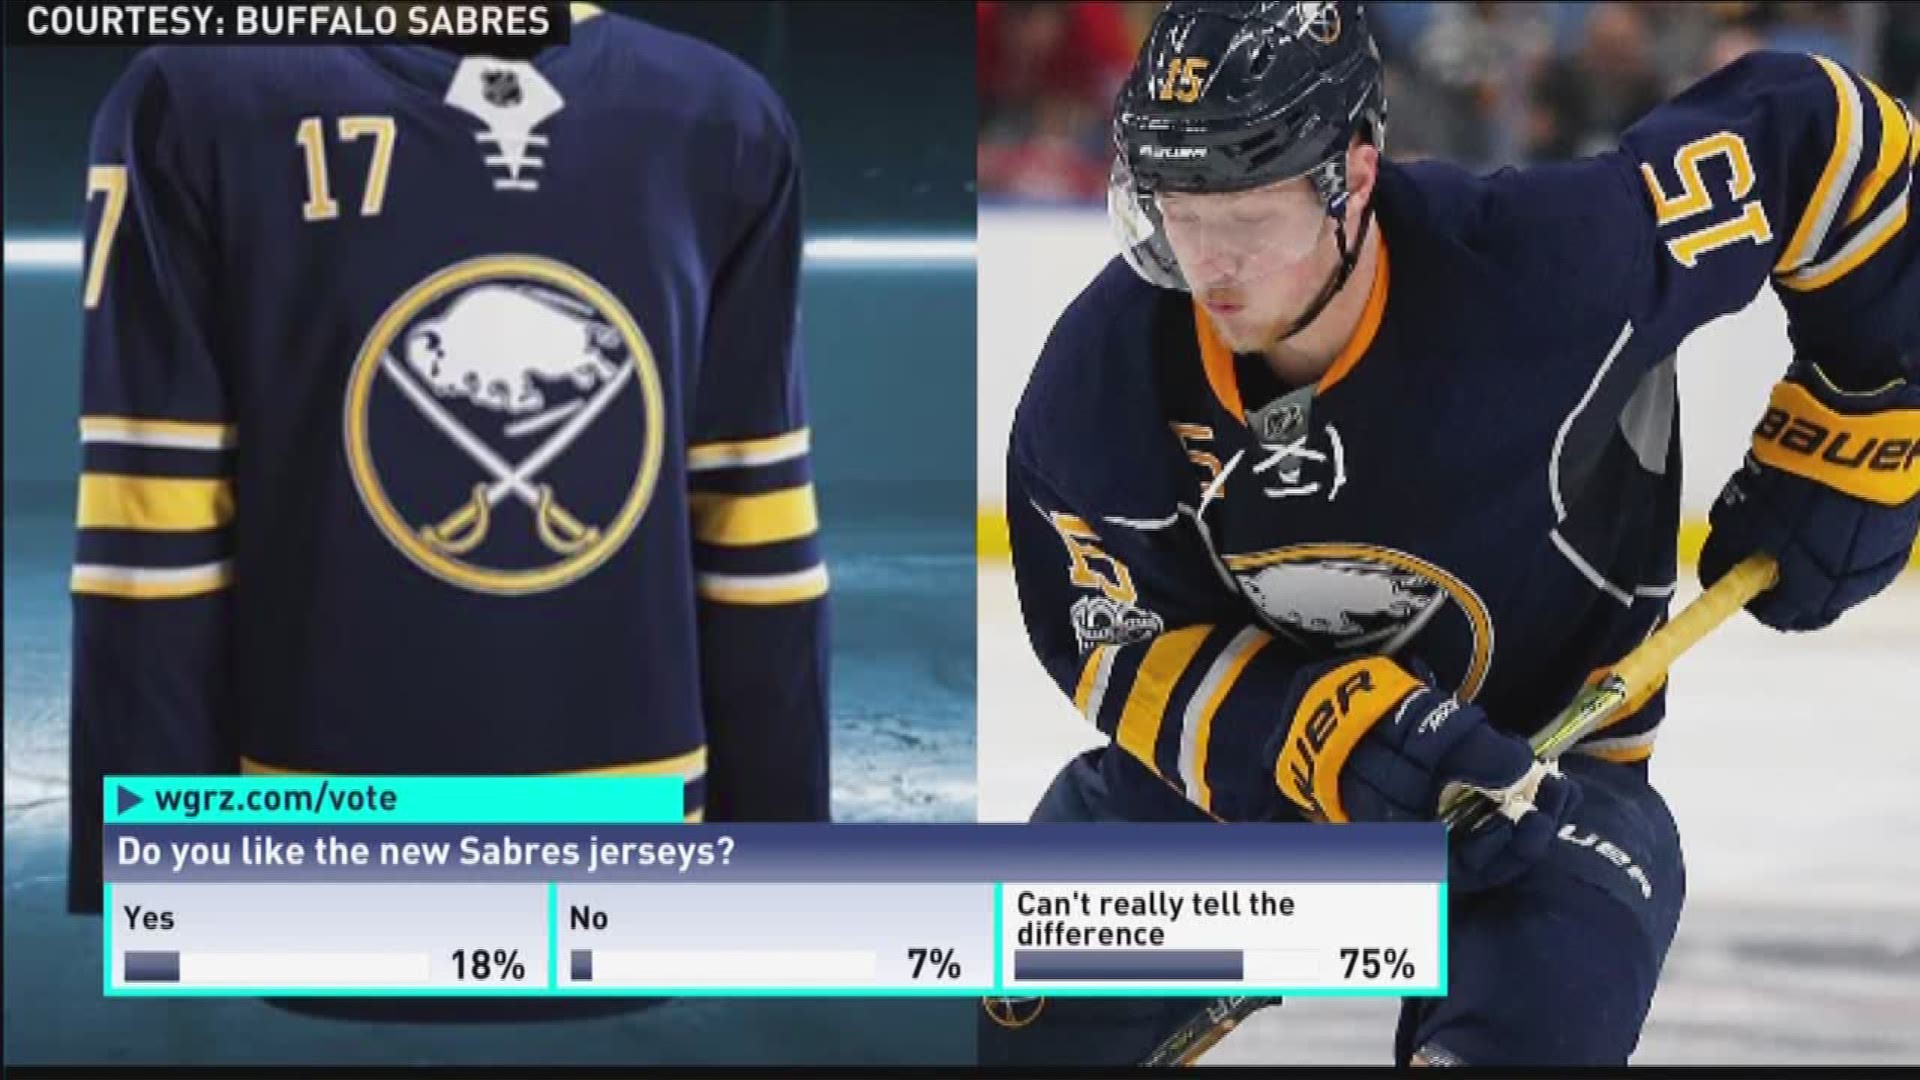 Buffalo Sabres' new jerseys feature the old royal blue